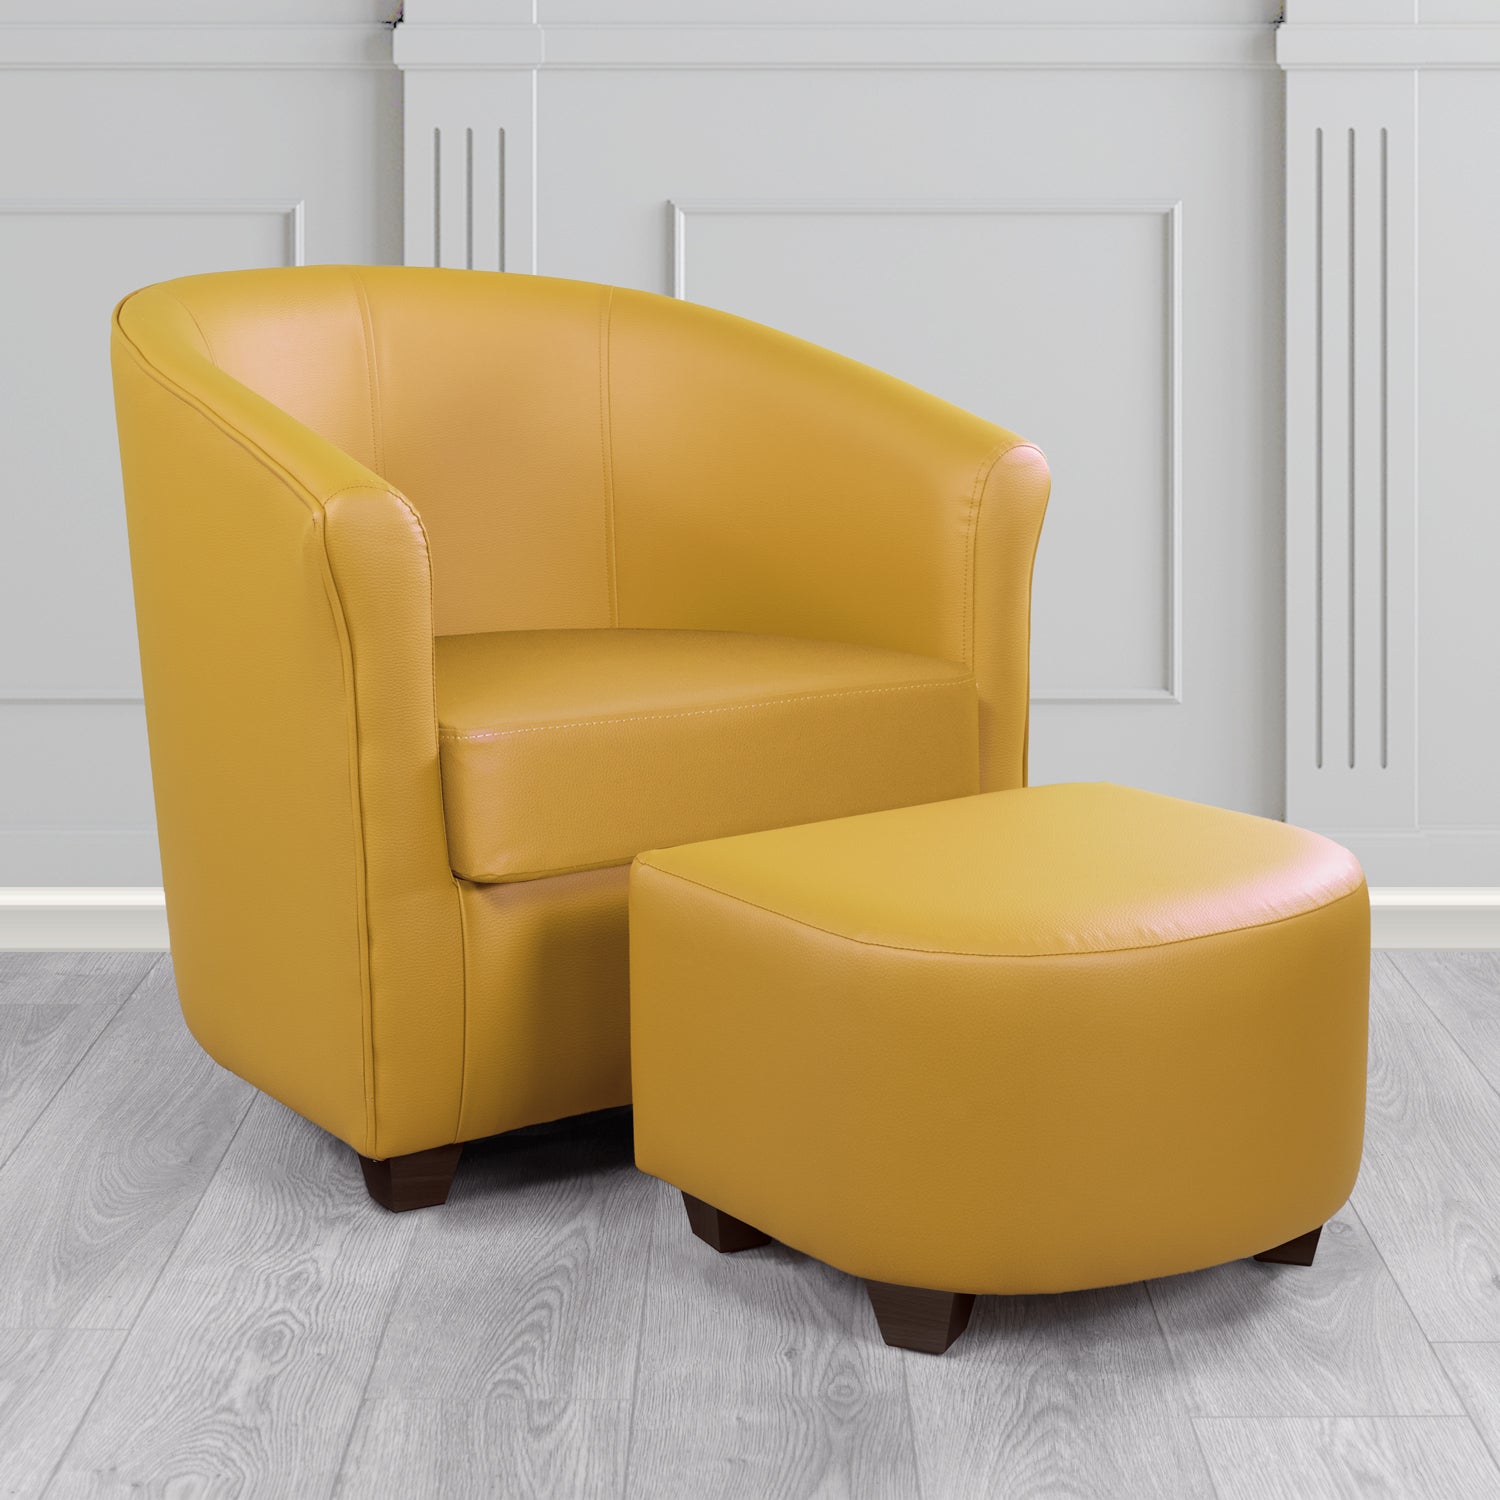 Cannes Tub Chair with Footstool Set in Just Colour Golden Honey Crib 5 Faux Leather - The Tub Chair Shop